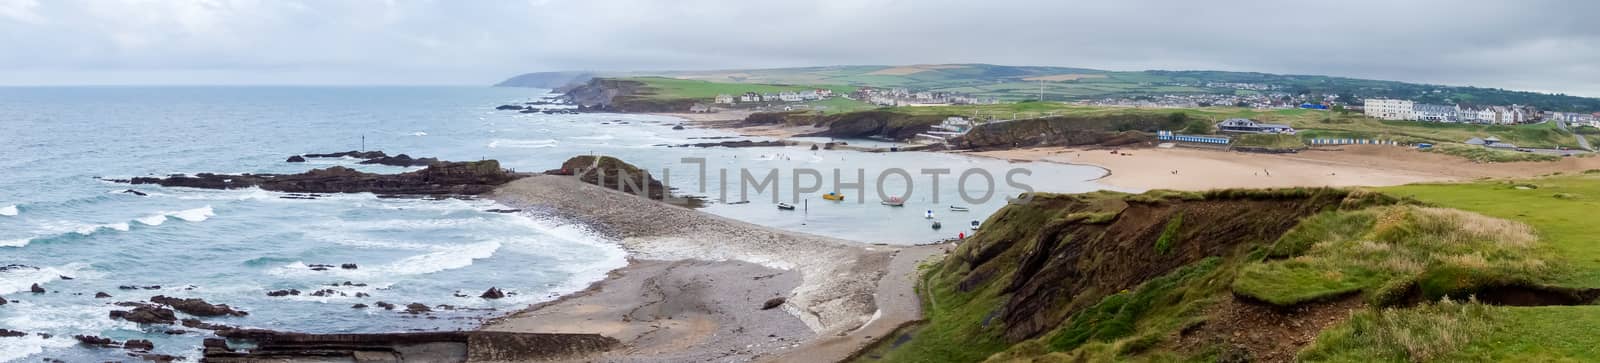 Scenic View of the Bude Coastline by phil_bird